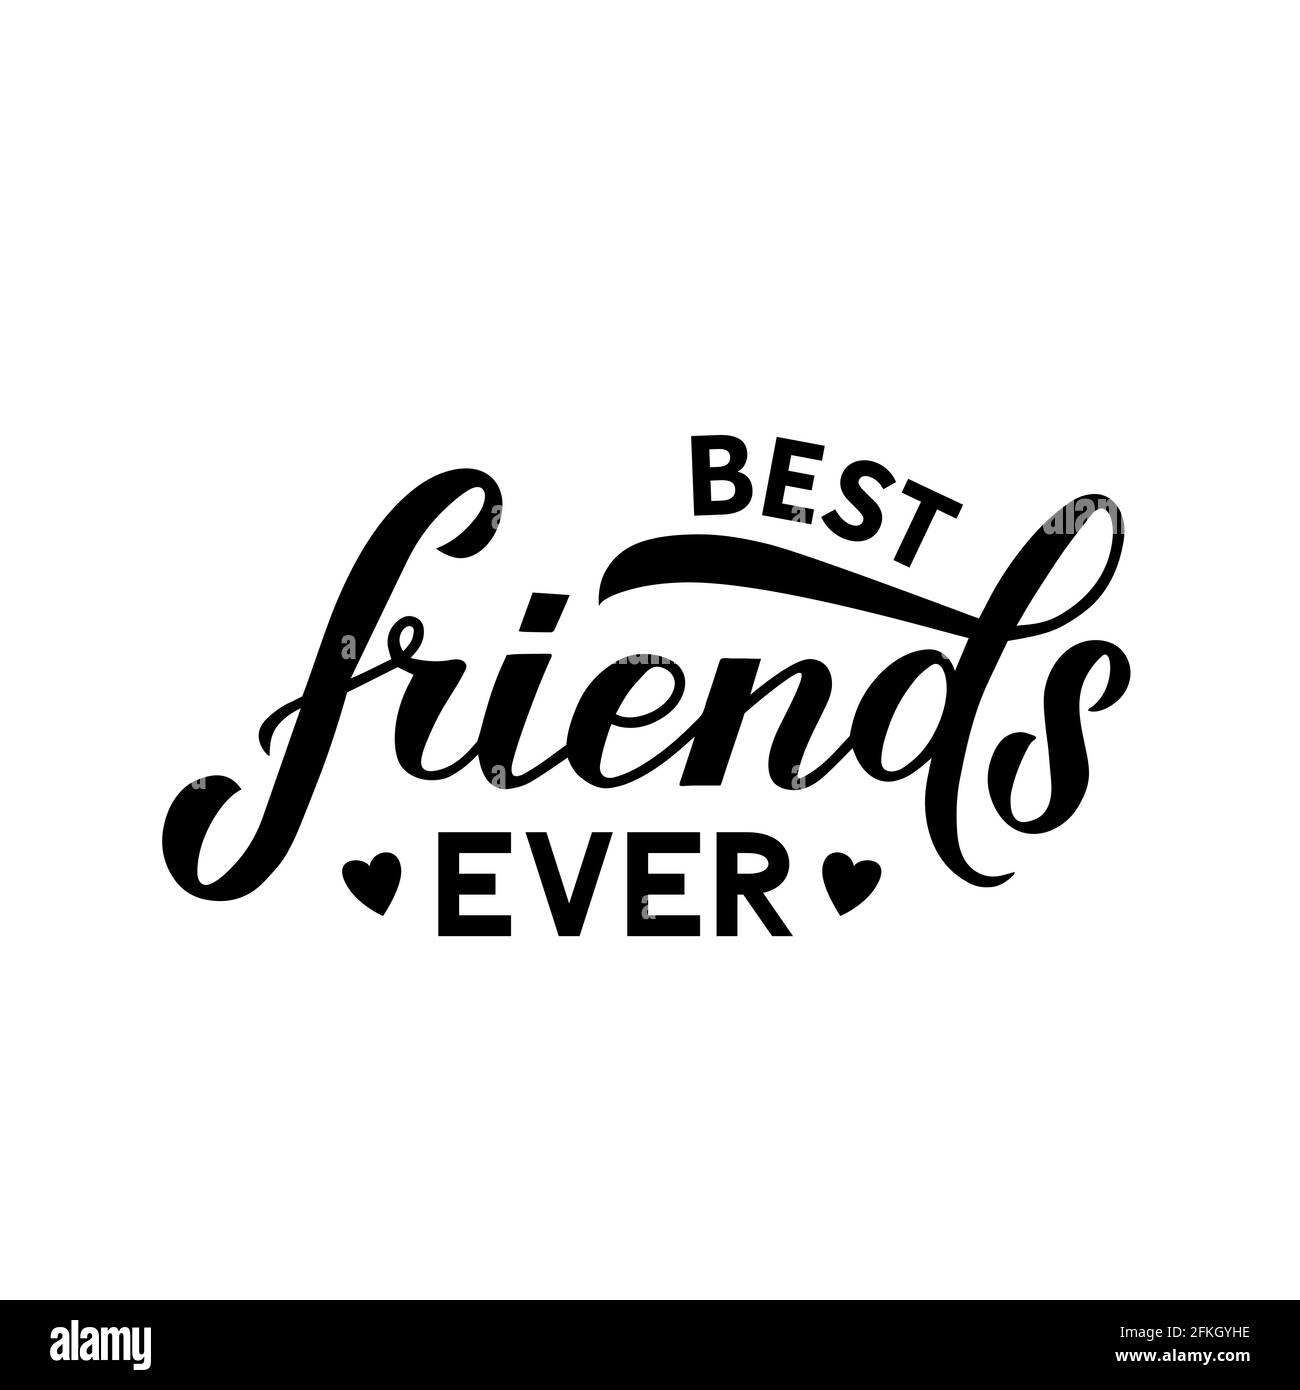 Best Friends Ever calligraphy hand lettering isolated on white ...